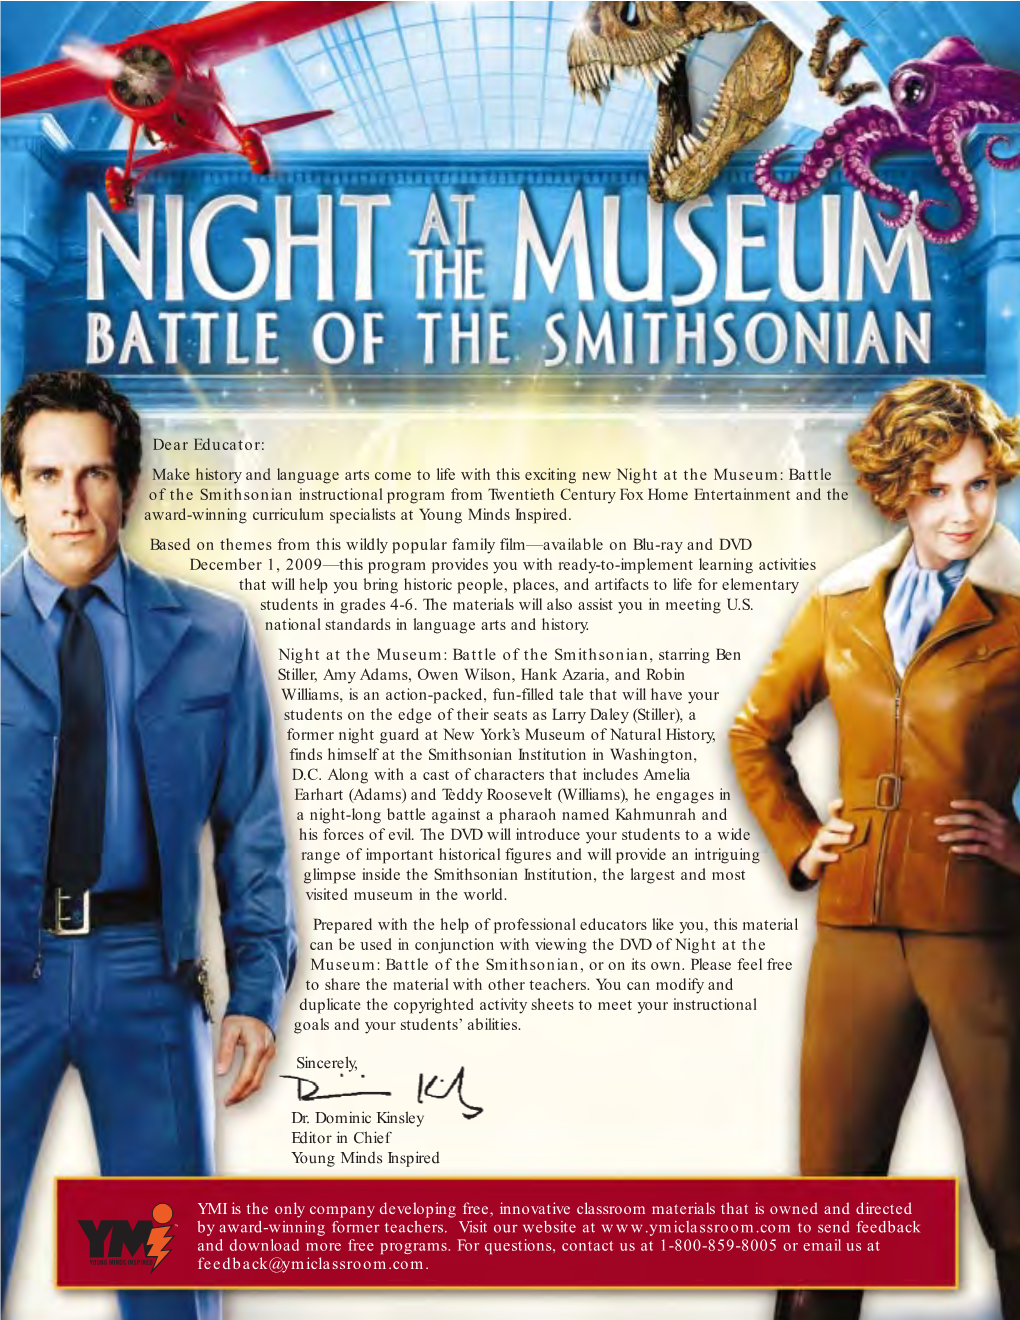 Battle of the Smithsonian Instructional Program from Twentieth Century Fox Home Entertainment and the Award-Winning Curriculum Specialists at Young Minds Inspired